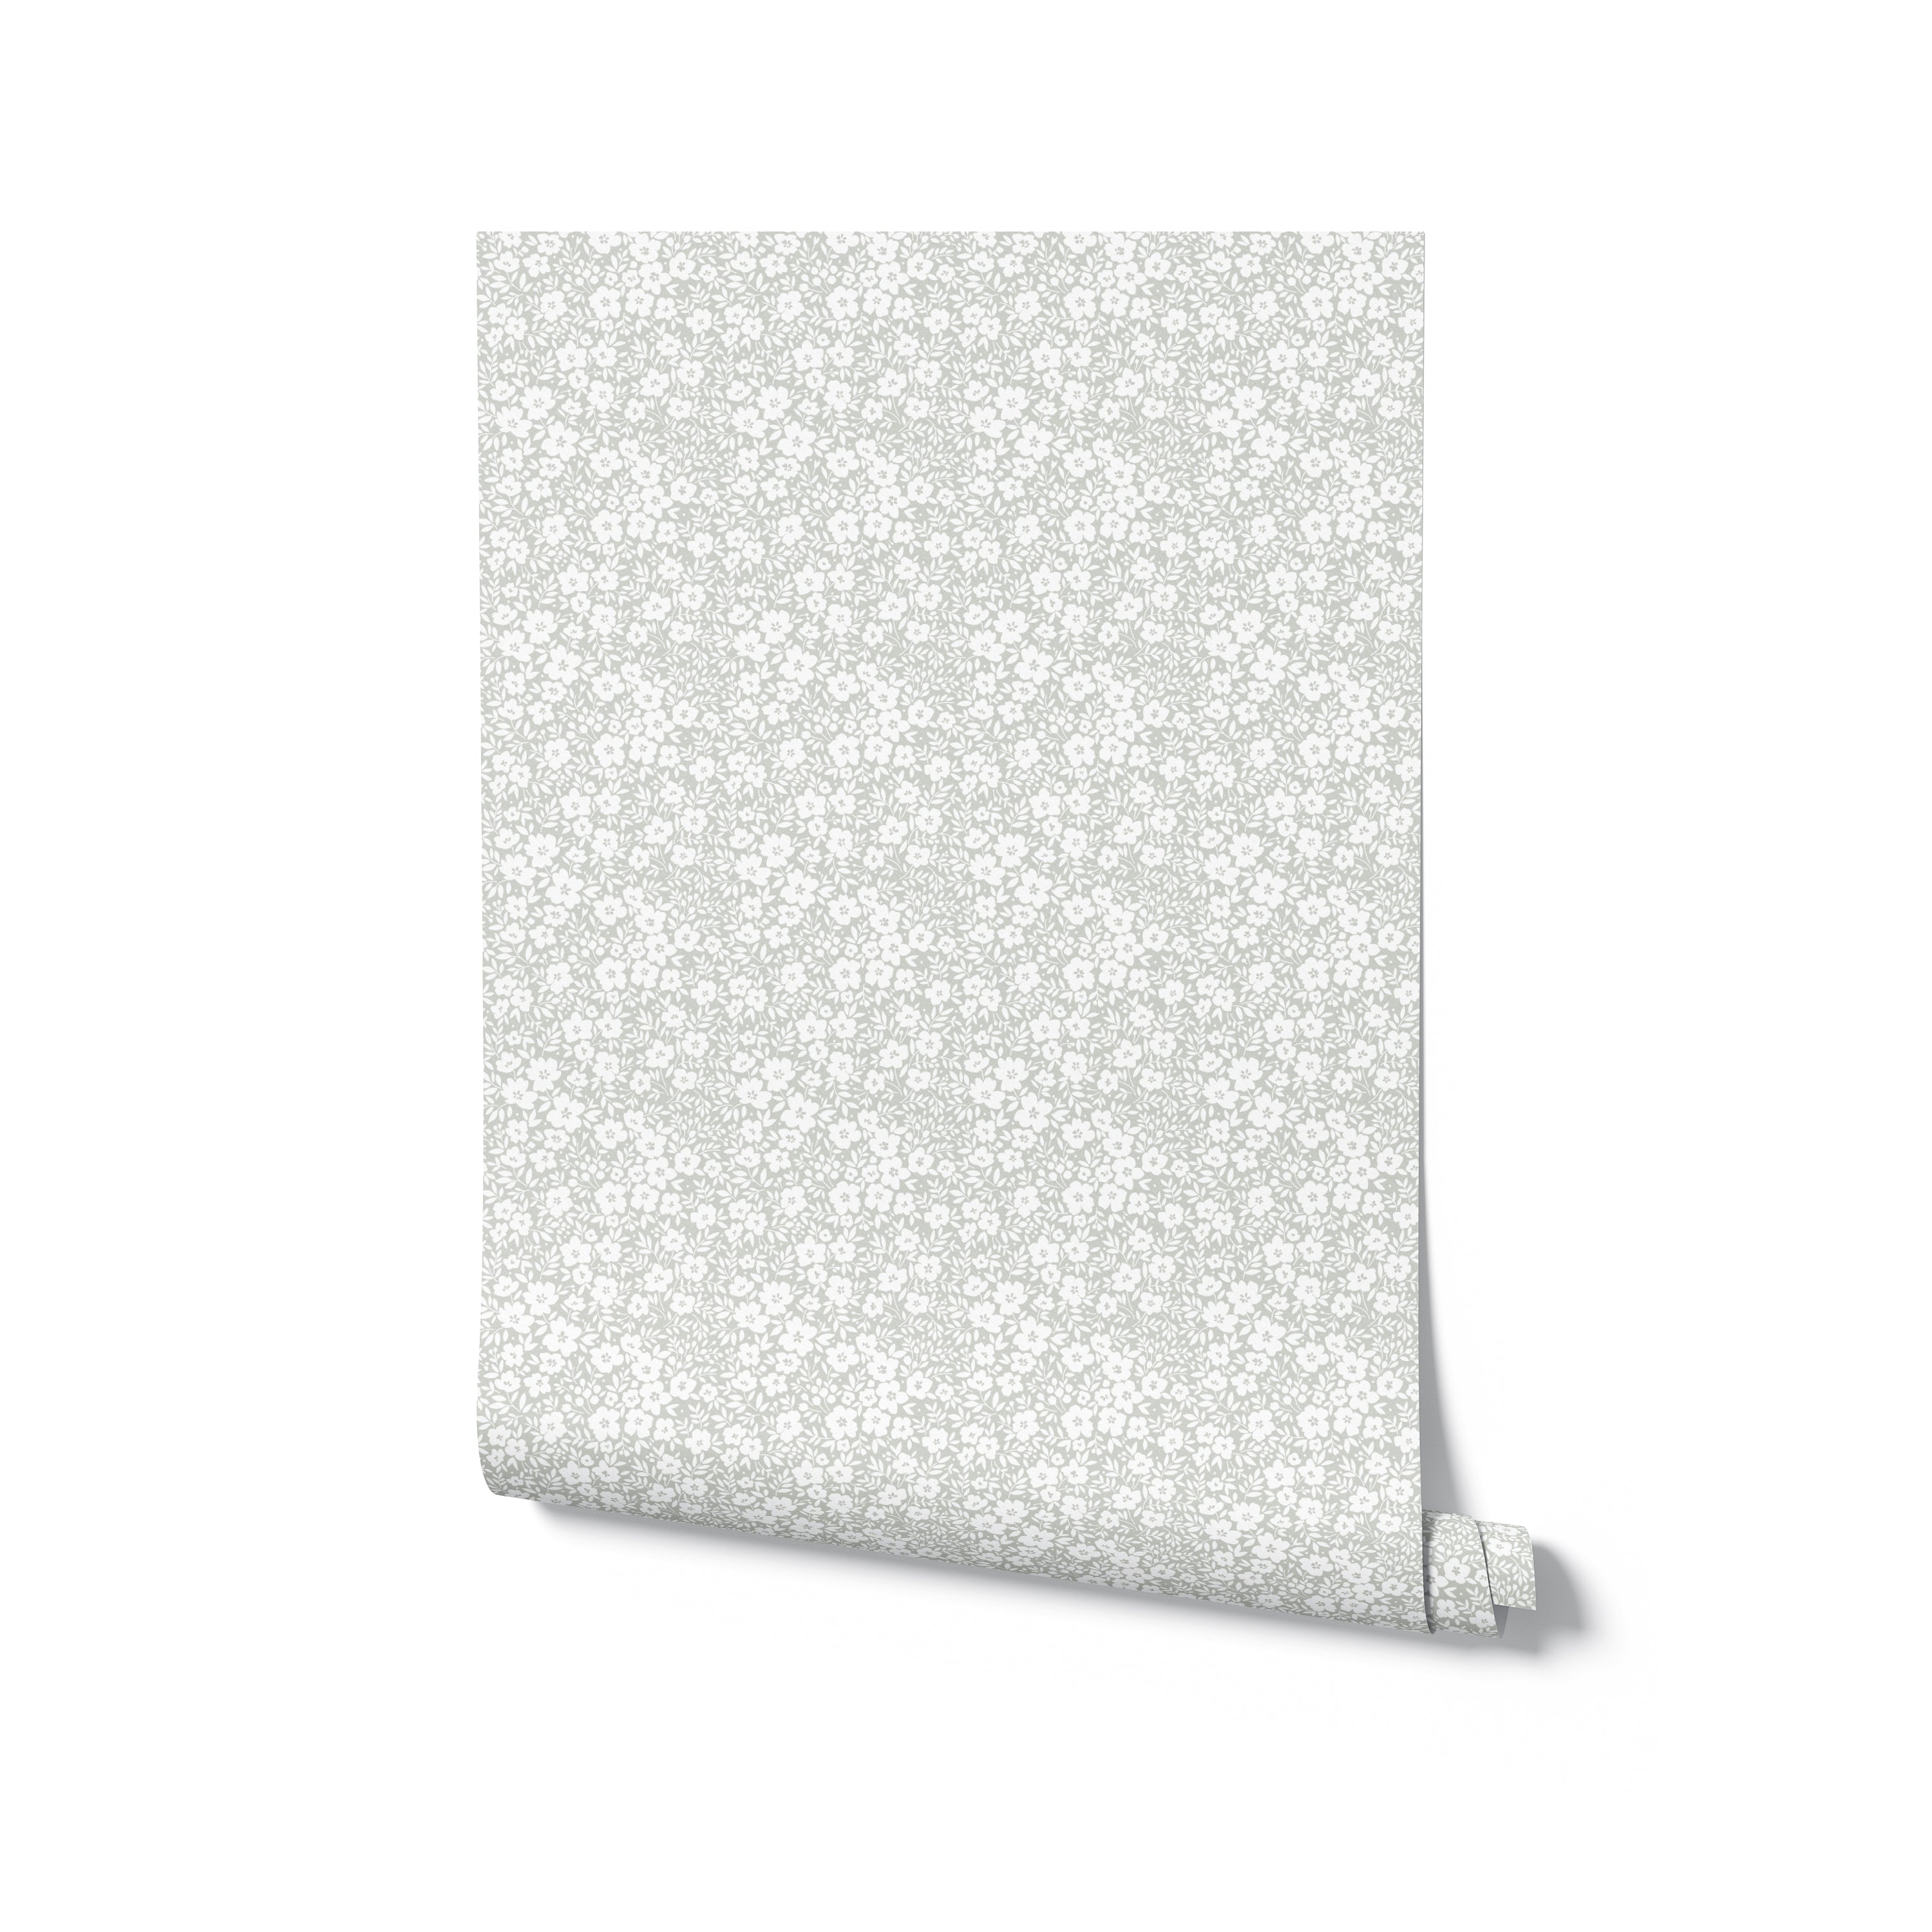 A wallpaper roll of 'Flower Power' design, showcasing a olive backdrop with a fine white flower print, standing vertically with the edge unrolling.